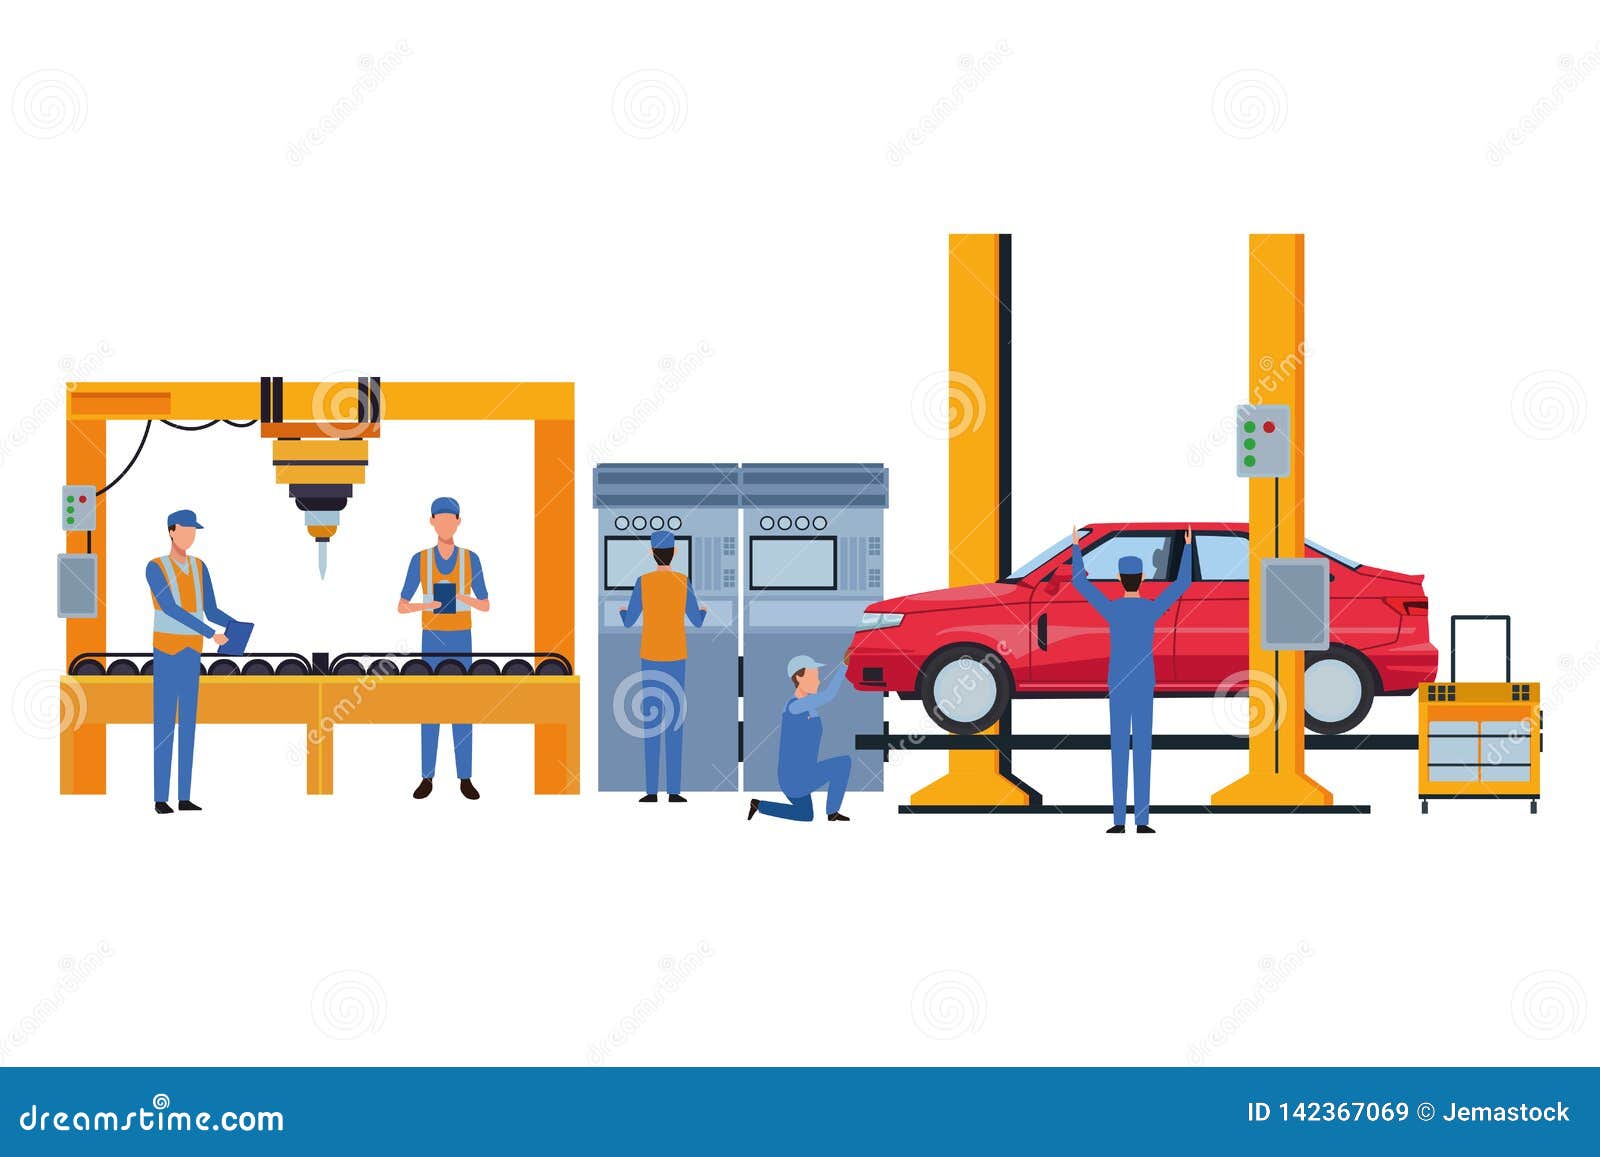 Industry Car Manufacturing Cartoon Stock Vector - Illustration of concept,  robot: 142367069